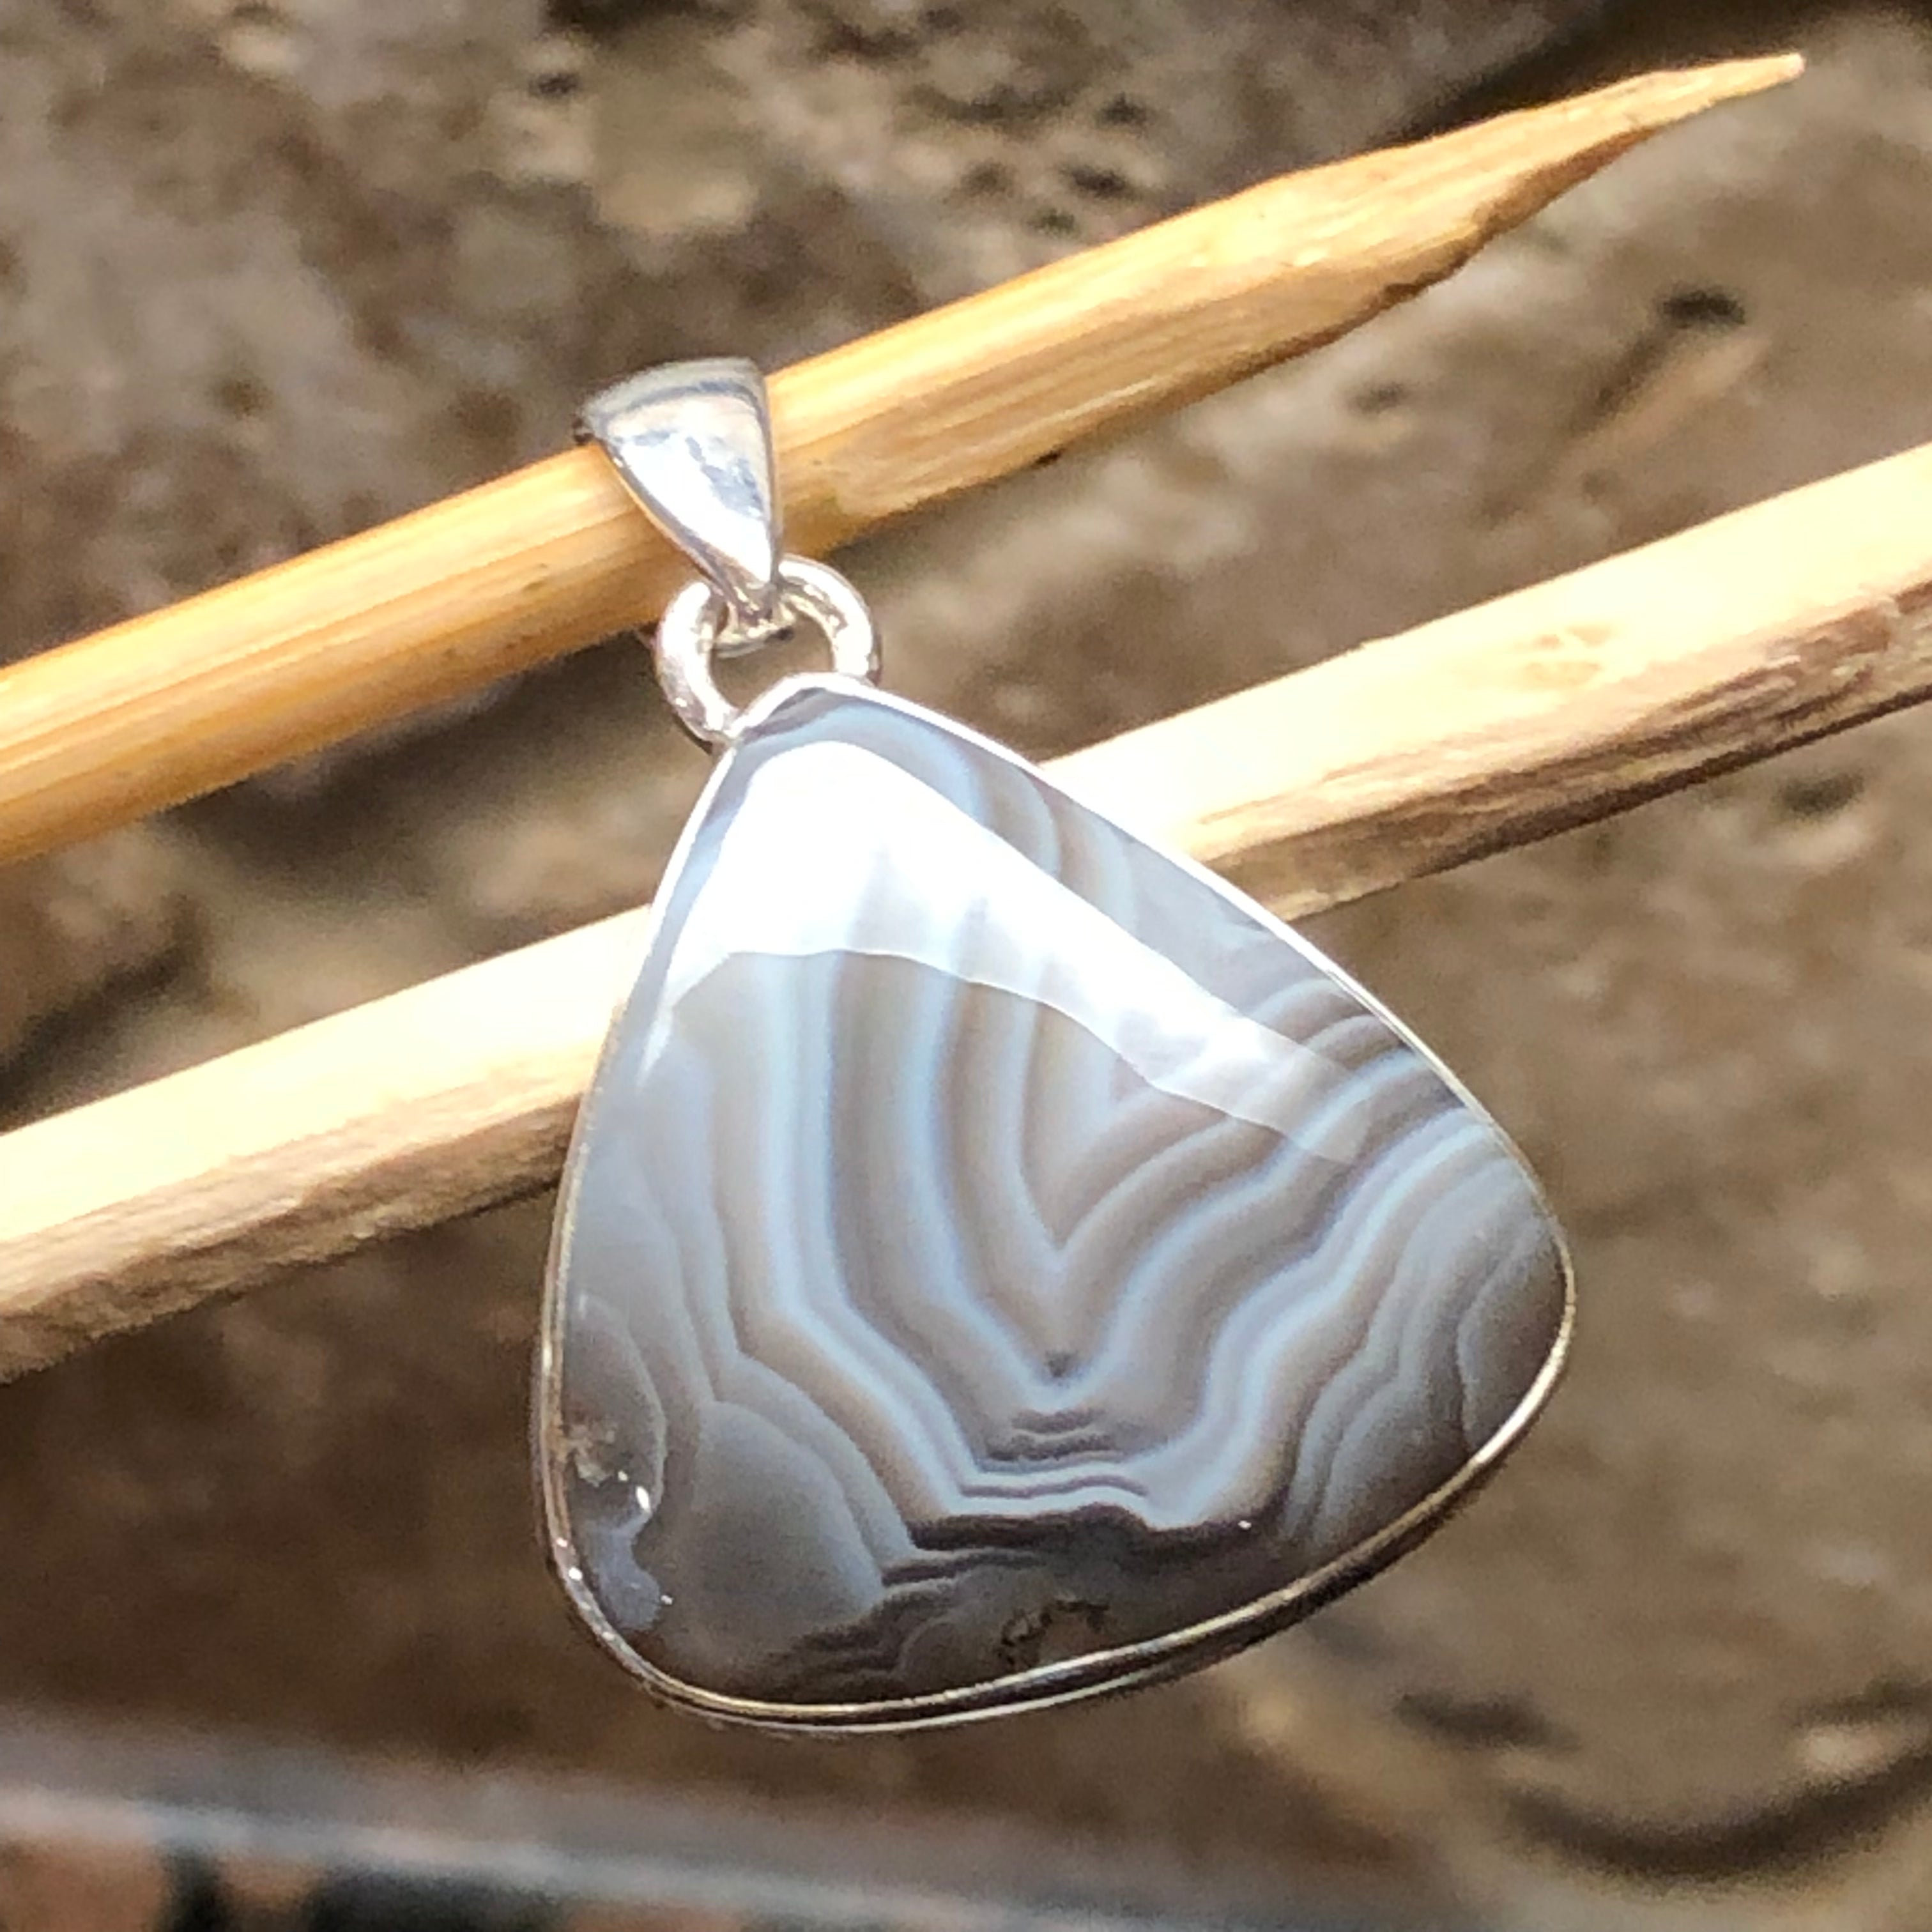 Genuine Botswana Agate 925 Solid Sterling Silver Pendant 40mm - Natural Rocks by Kala